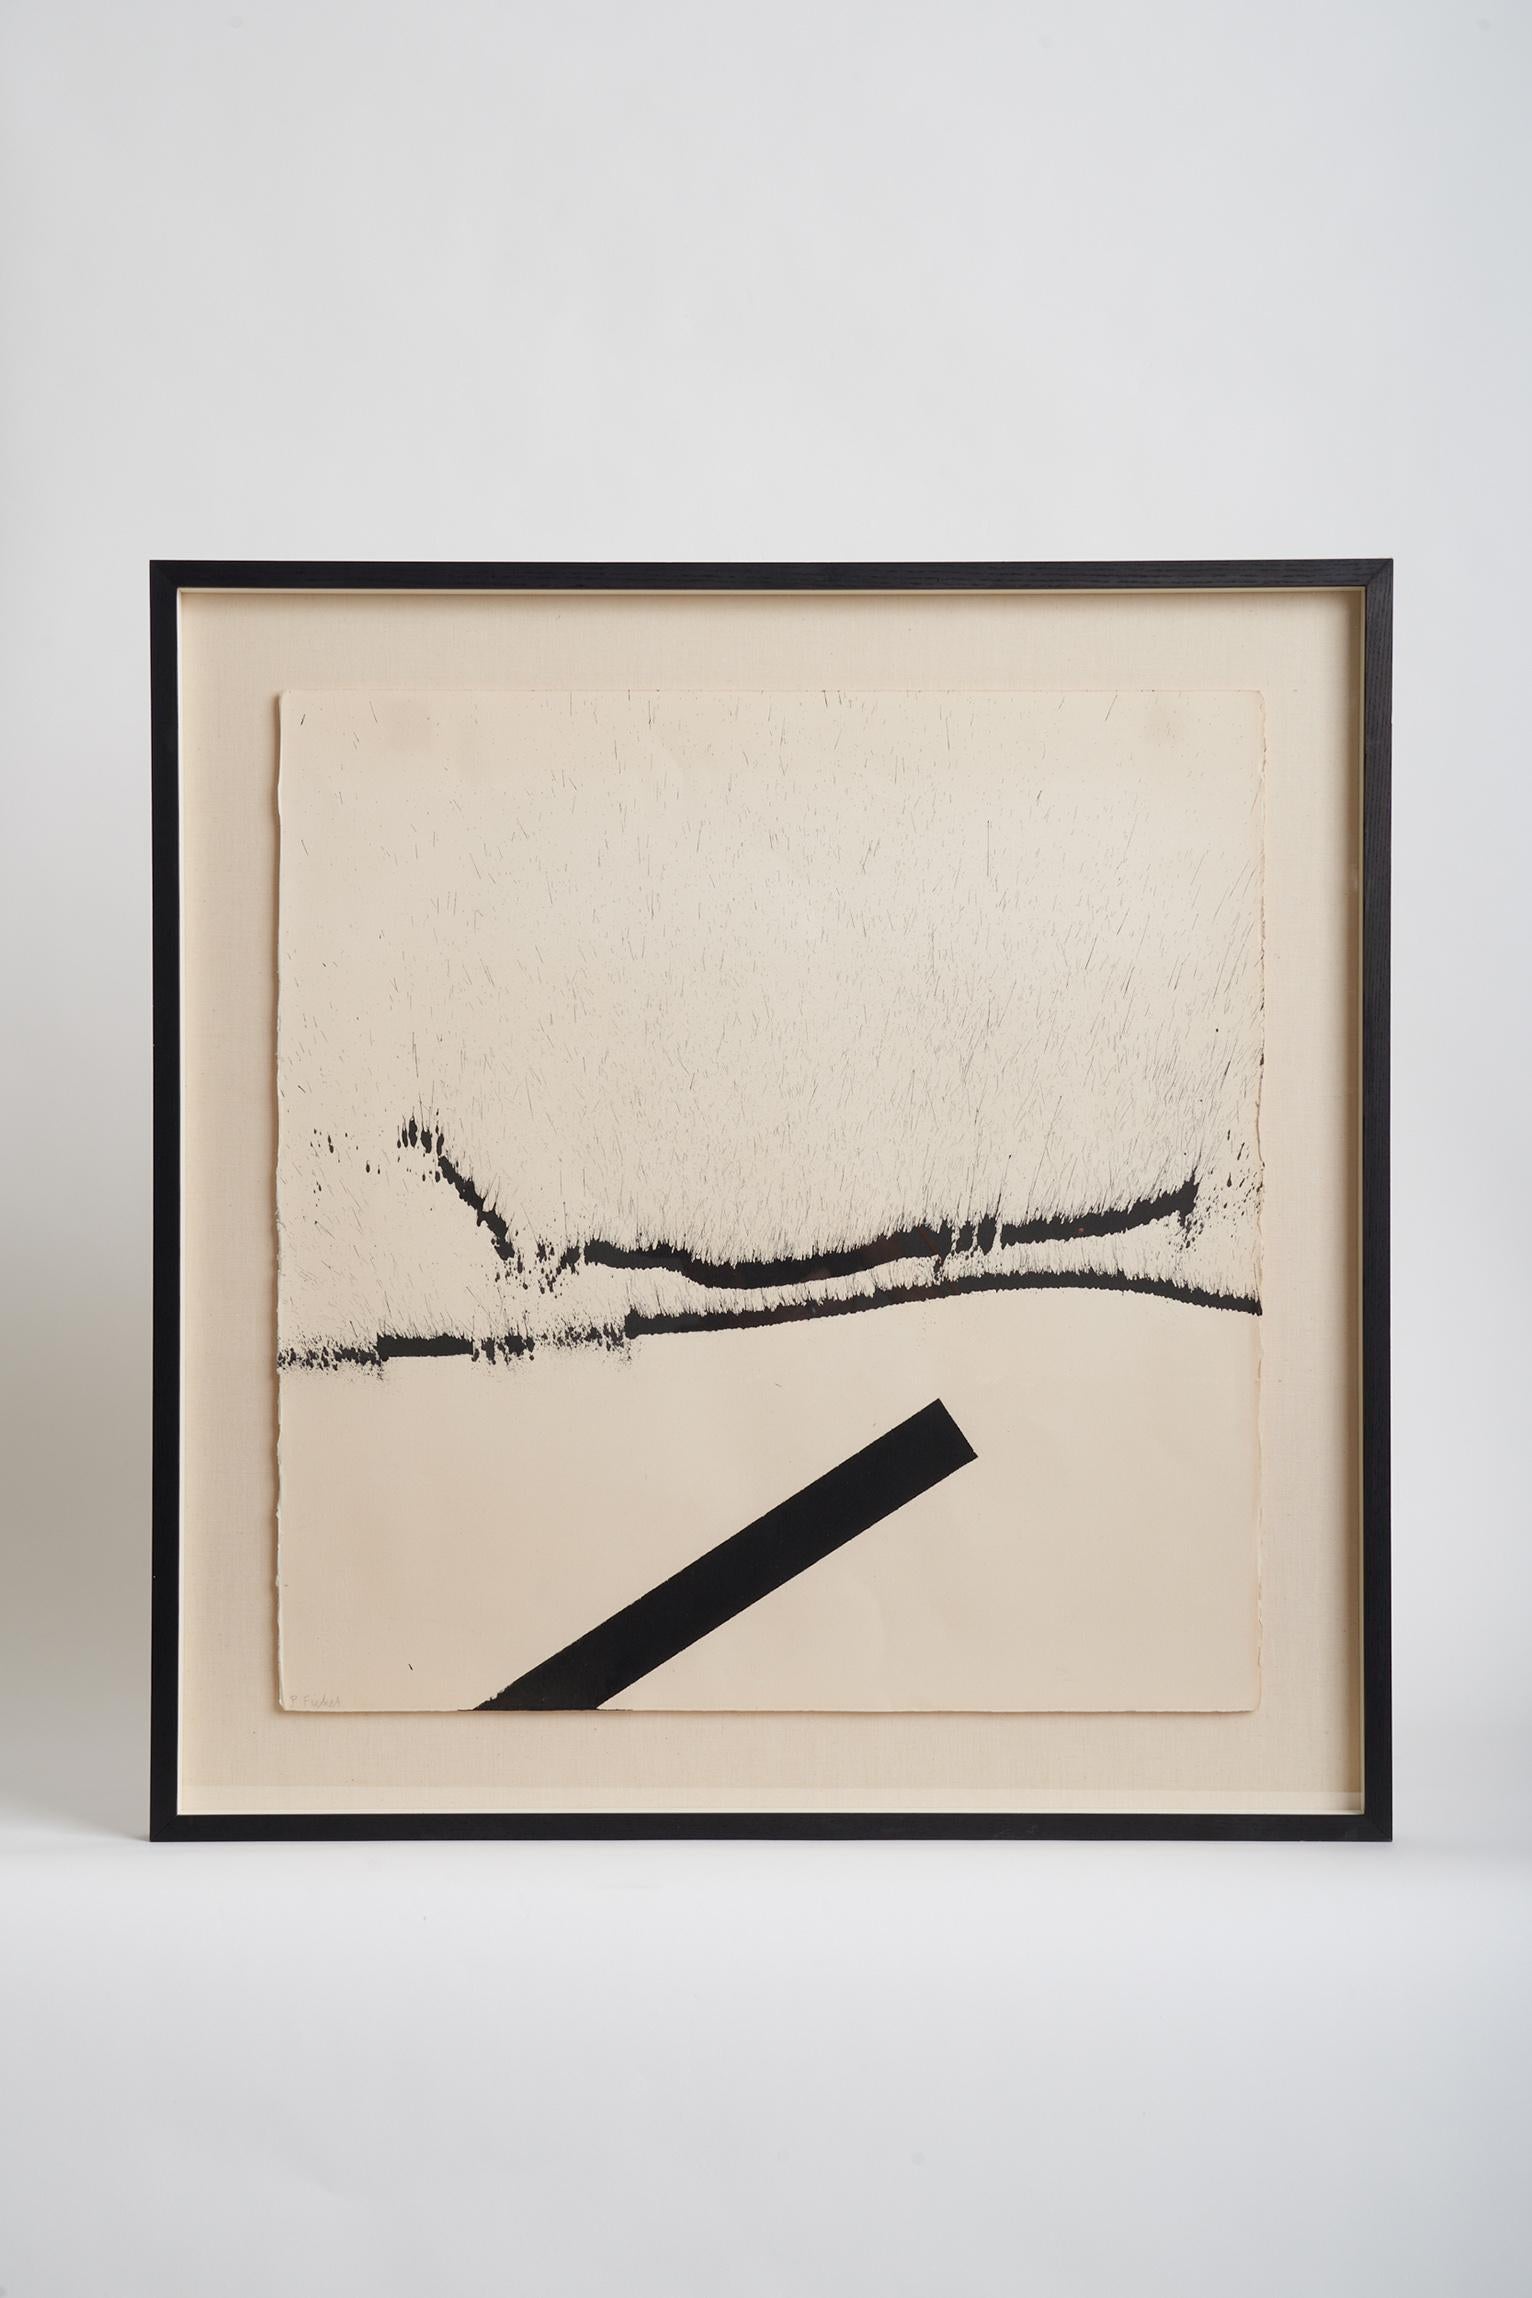 An abstract work of Art by Pierre Fichet (1927-2007).
Monochrome lithograph on Velin d'Arches paper. Signed.
In a new black stained oak frame and linen background.

Pierre Fichet was born on 10th August 1927 in Paris and passed away on 8th